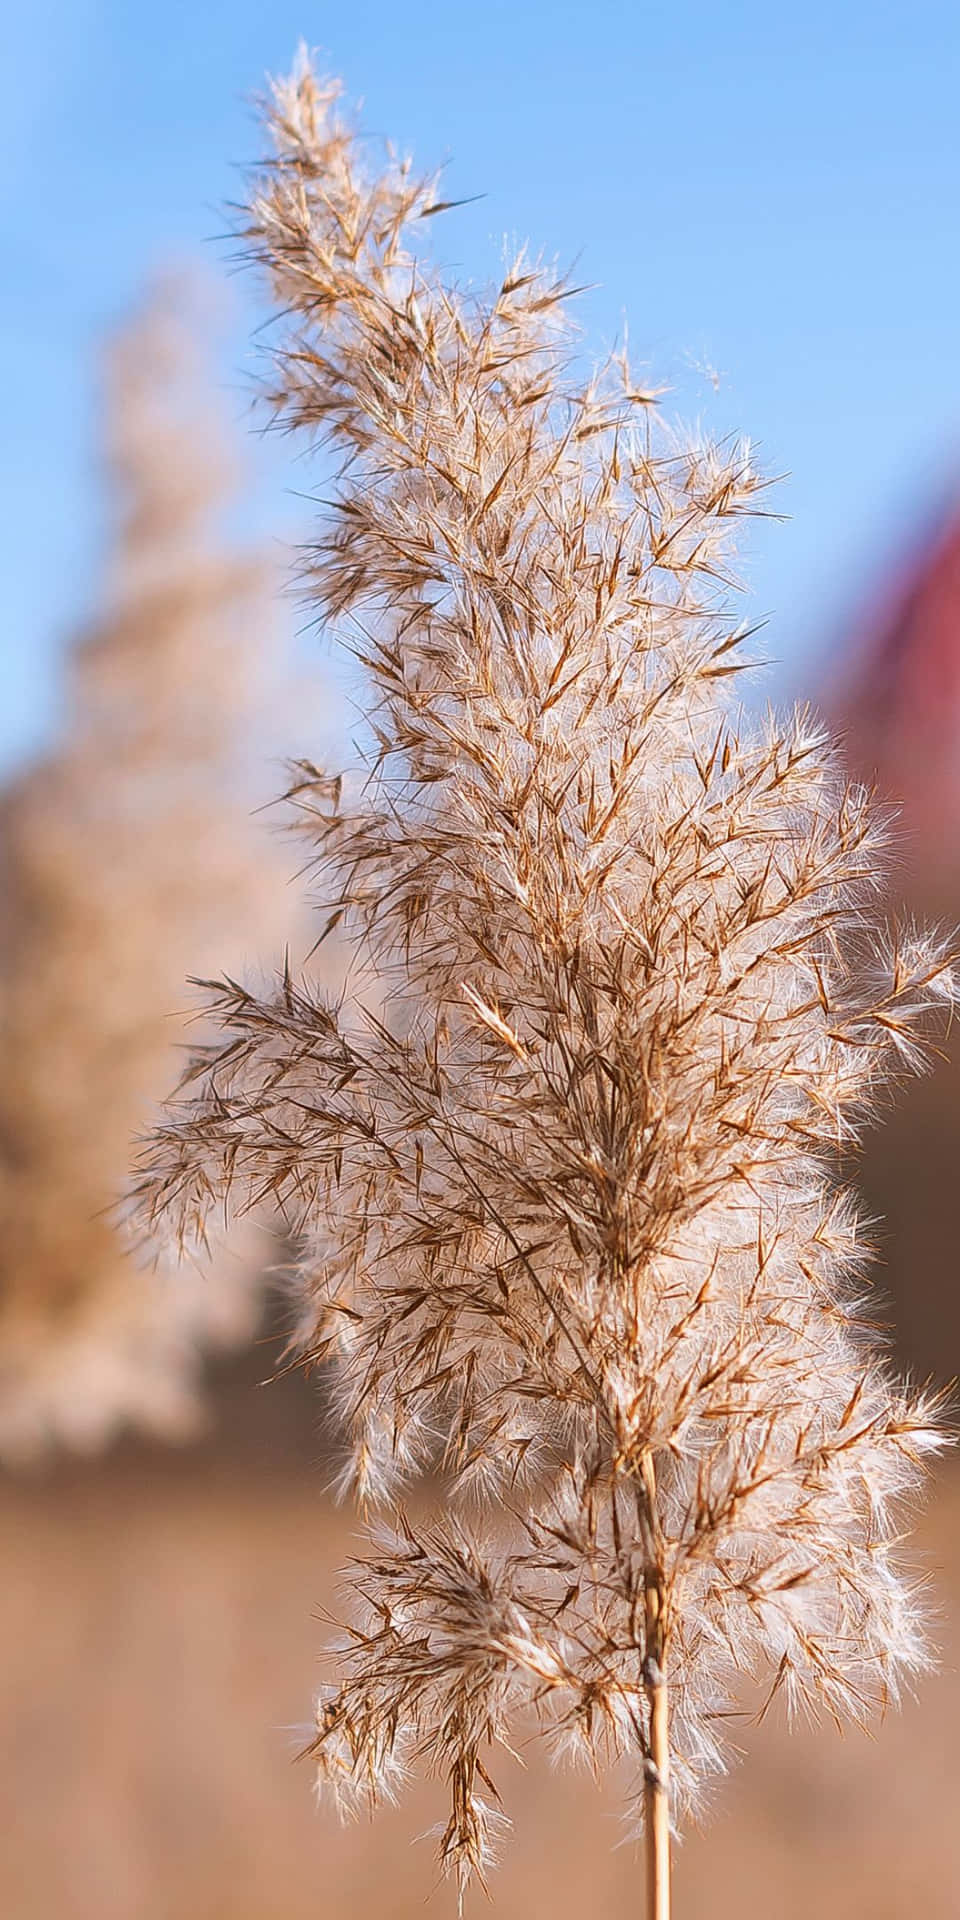 A Tall Grass Plant In The Desert